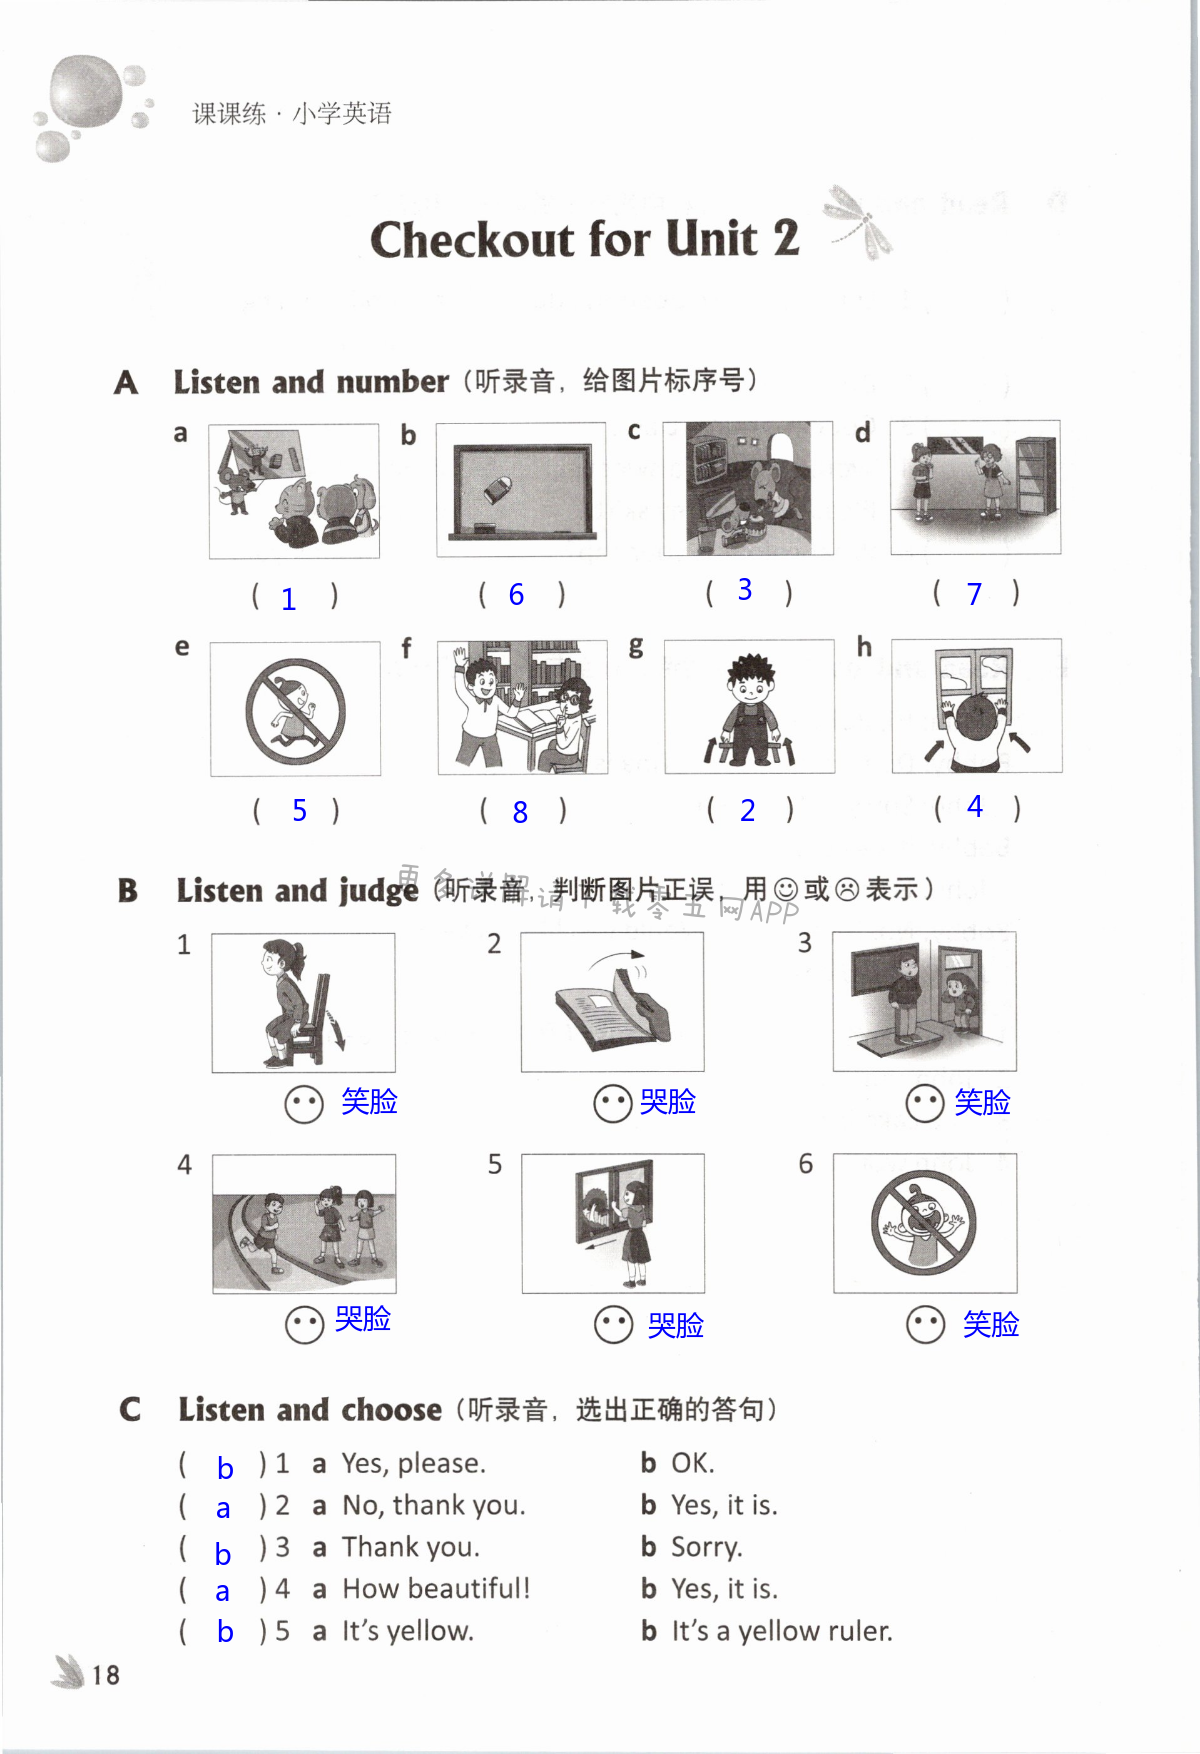 Unit 2 In the library - 第18页